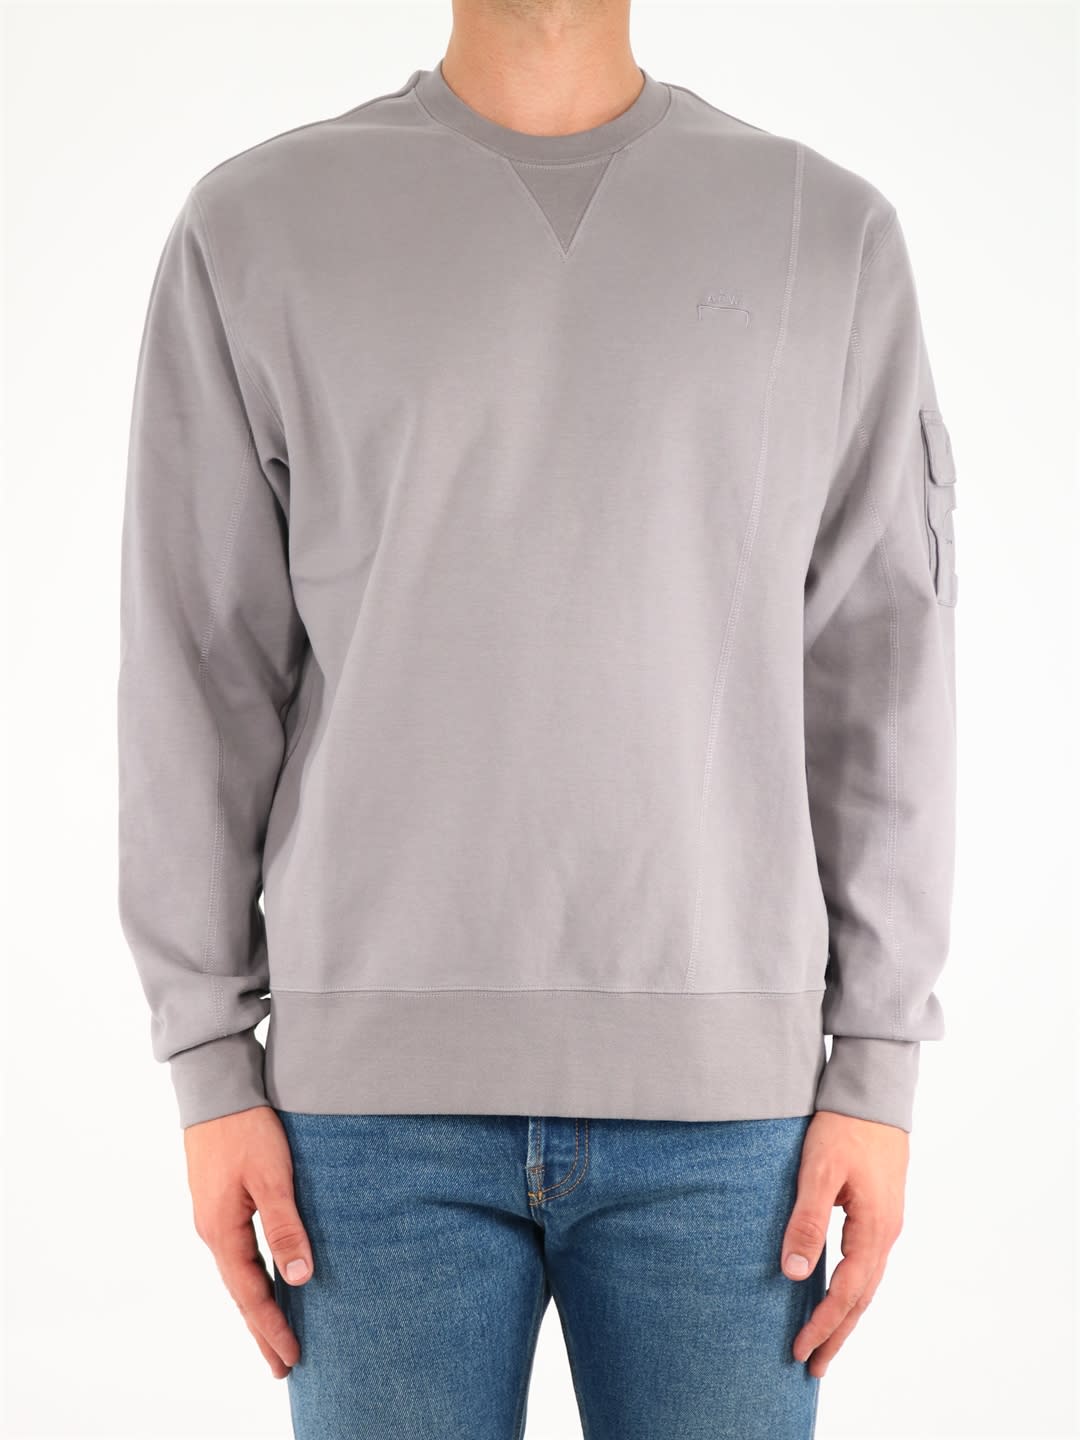 A-COLD-WALL Cotton Sweatshirt With Pocket